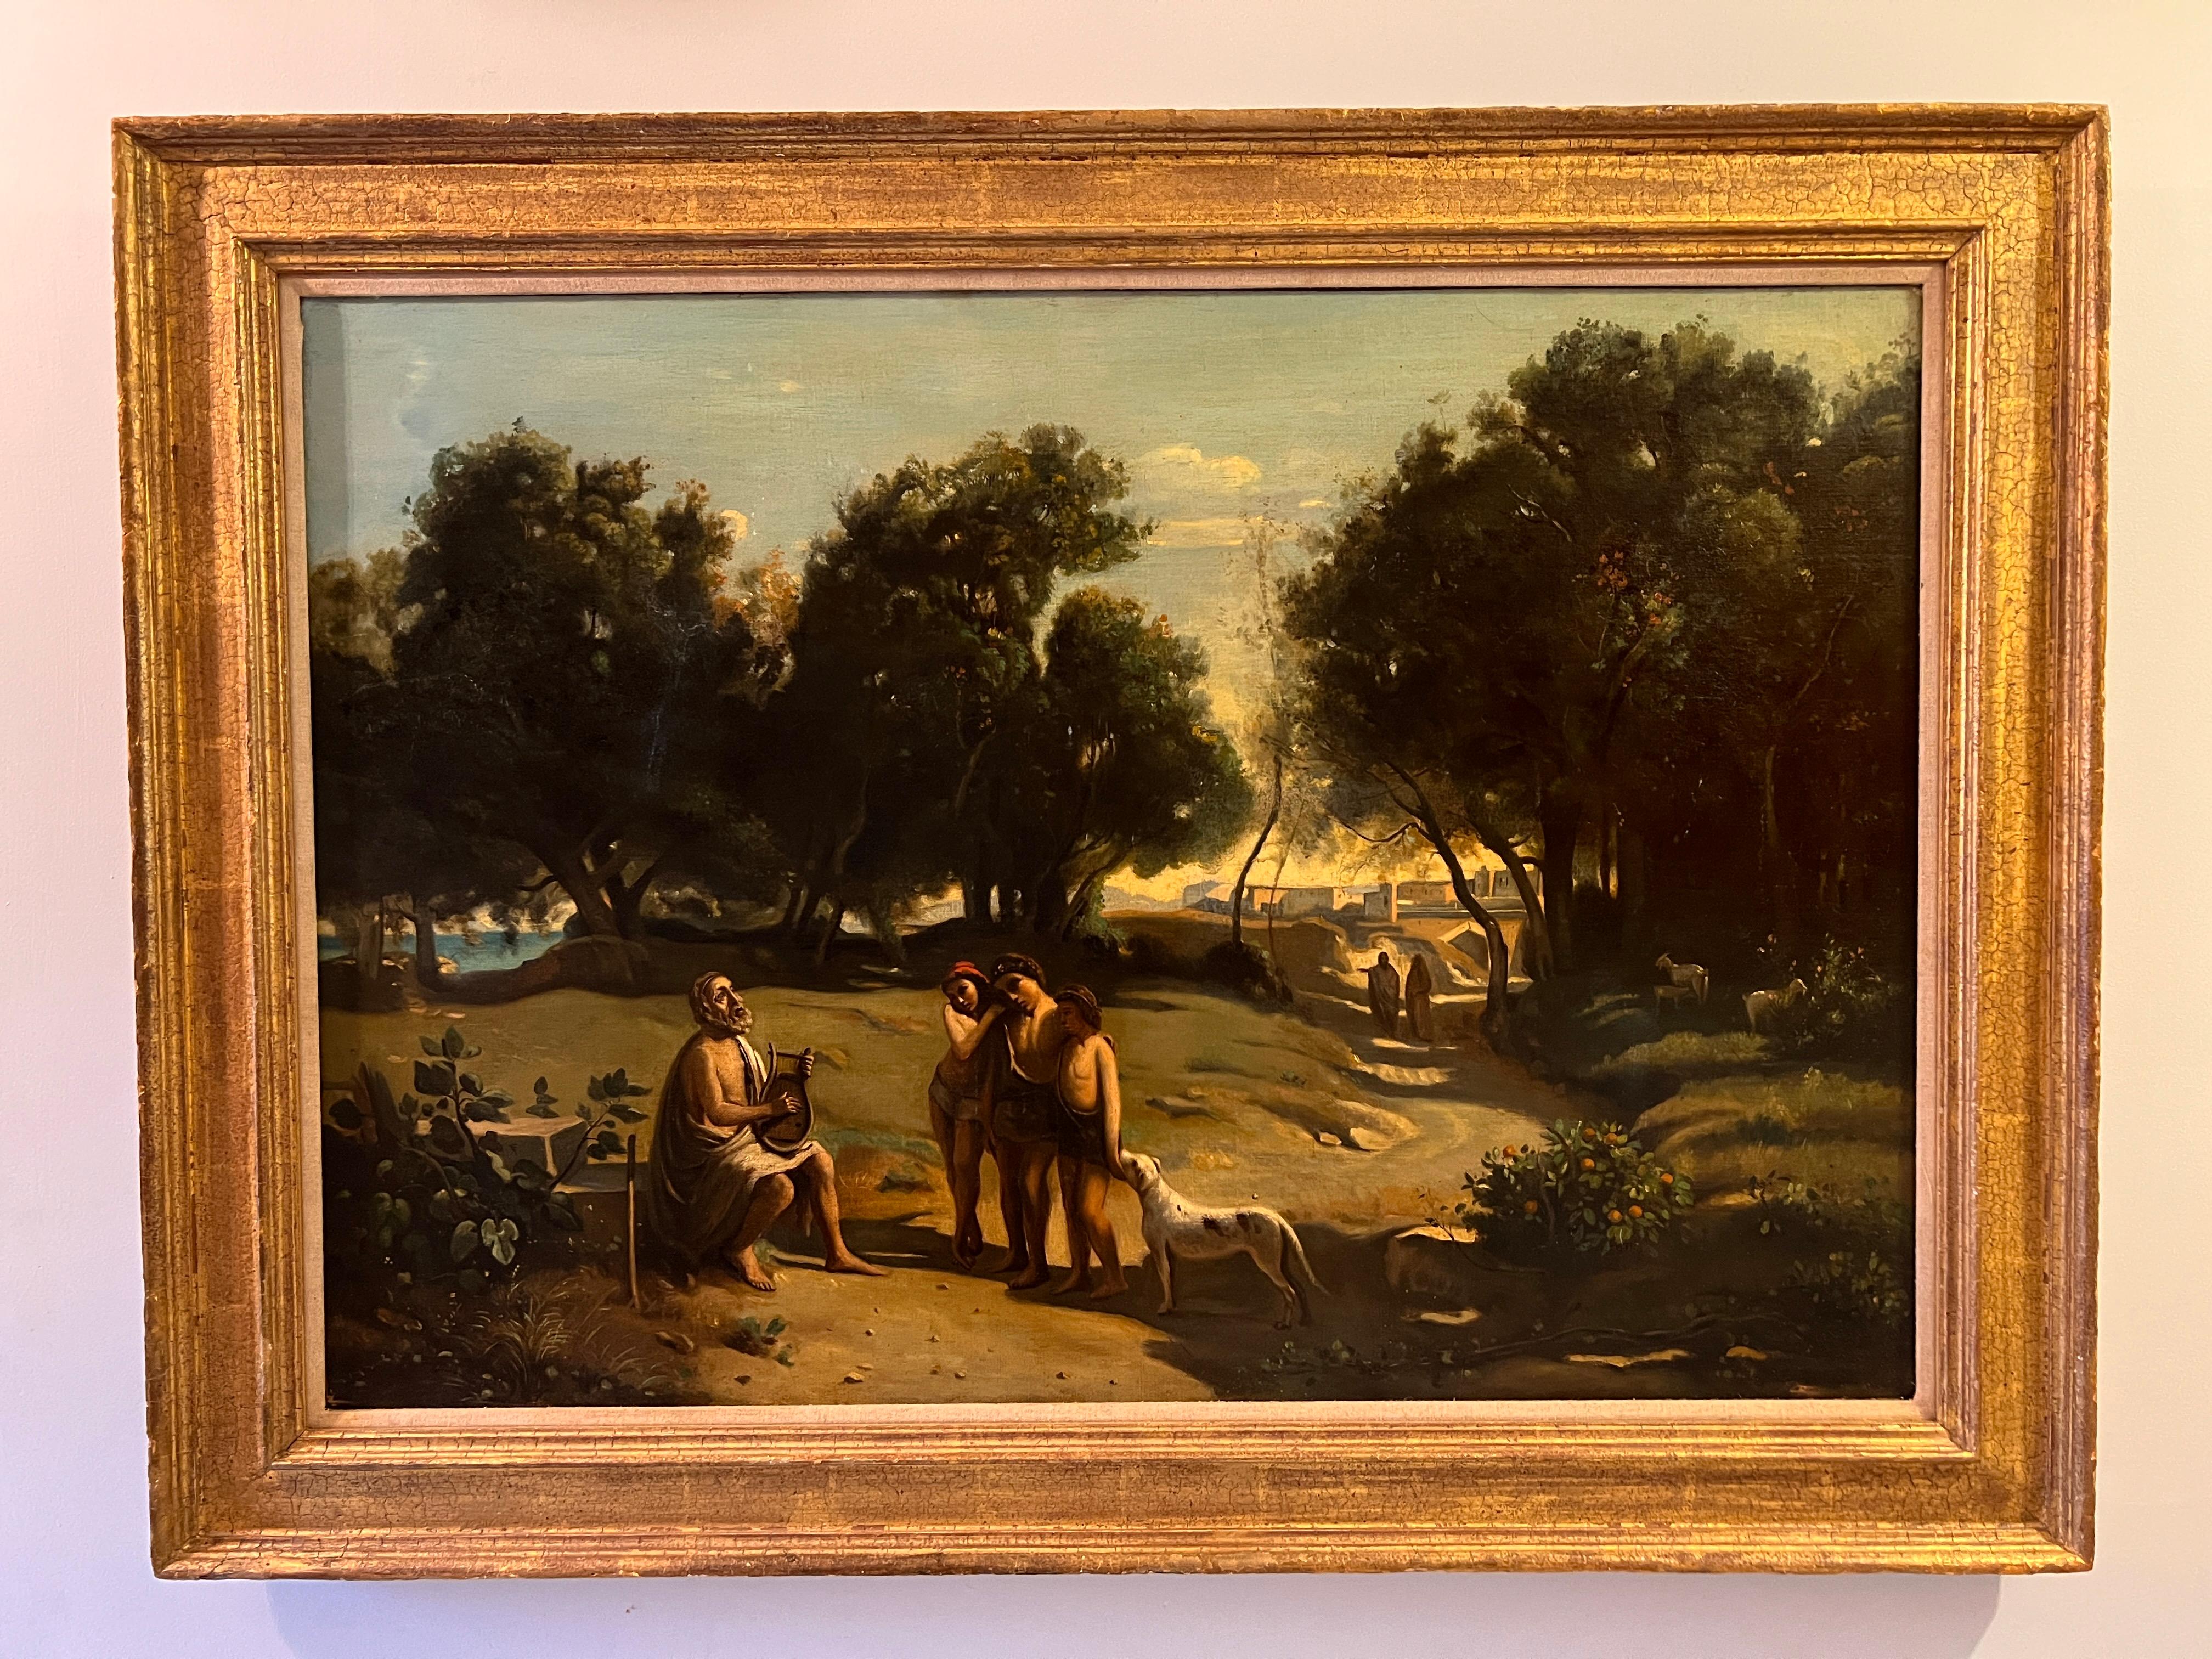 Antique 19C. Oil painting on canvas, neoclassical Scene, Homer playing his Lyre - Painting by Unknown